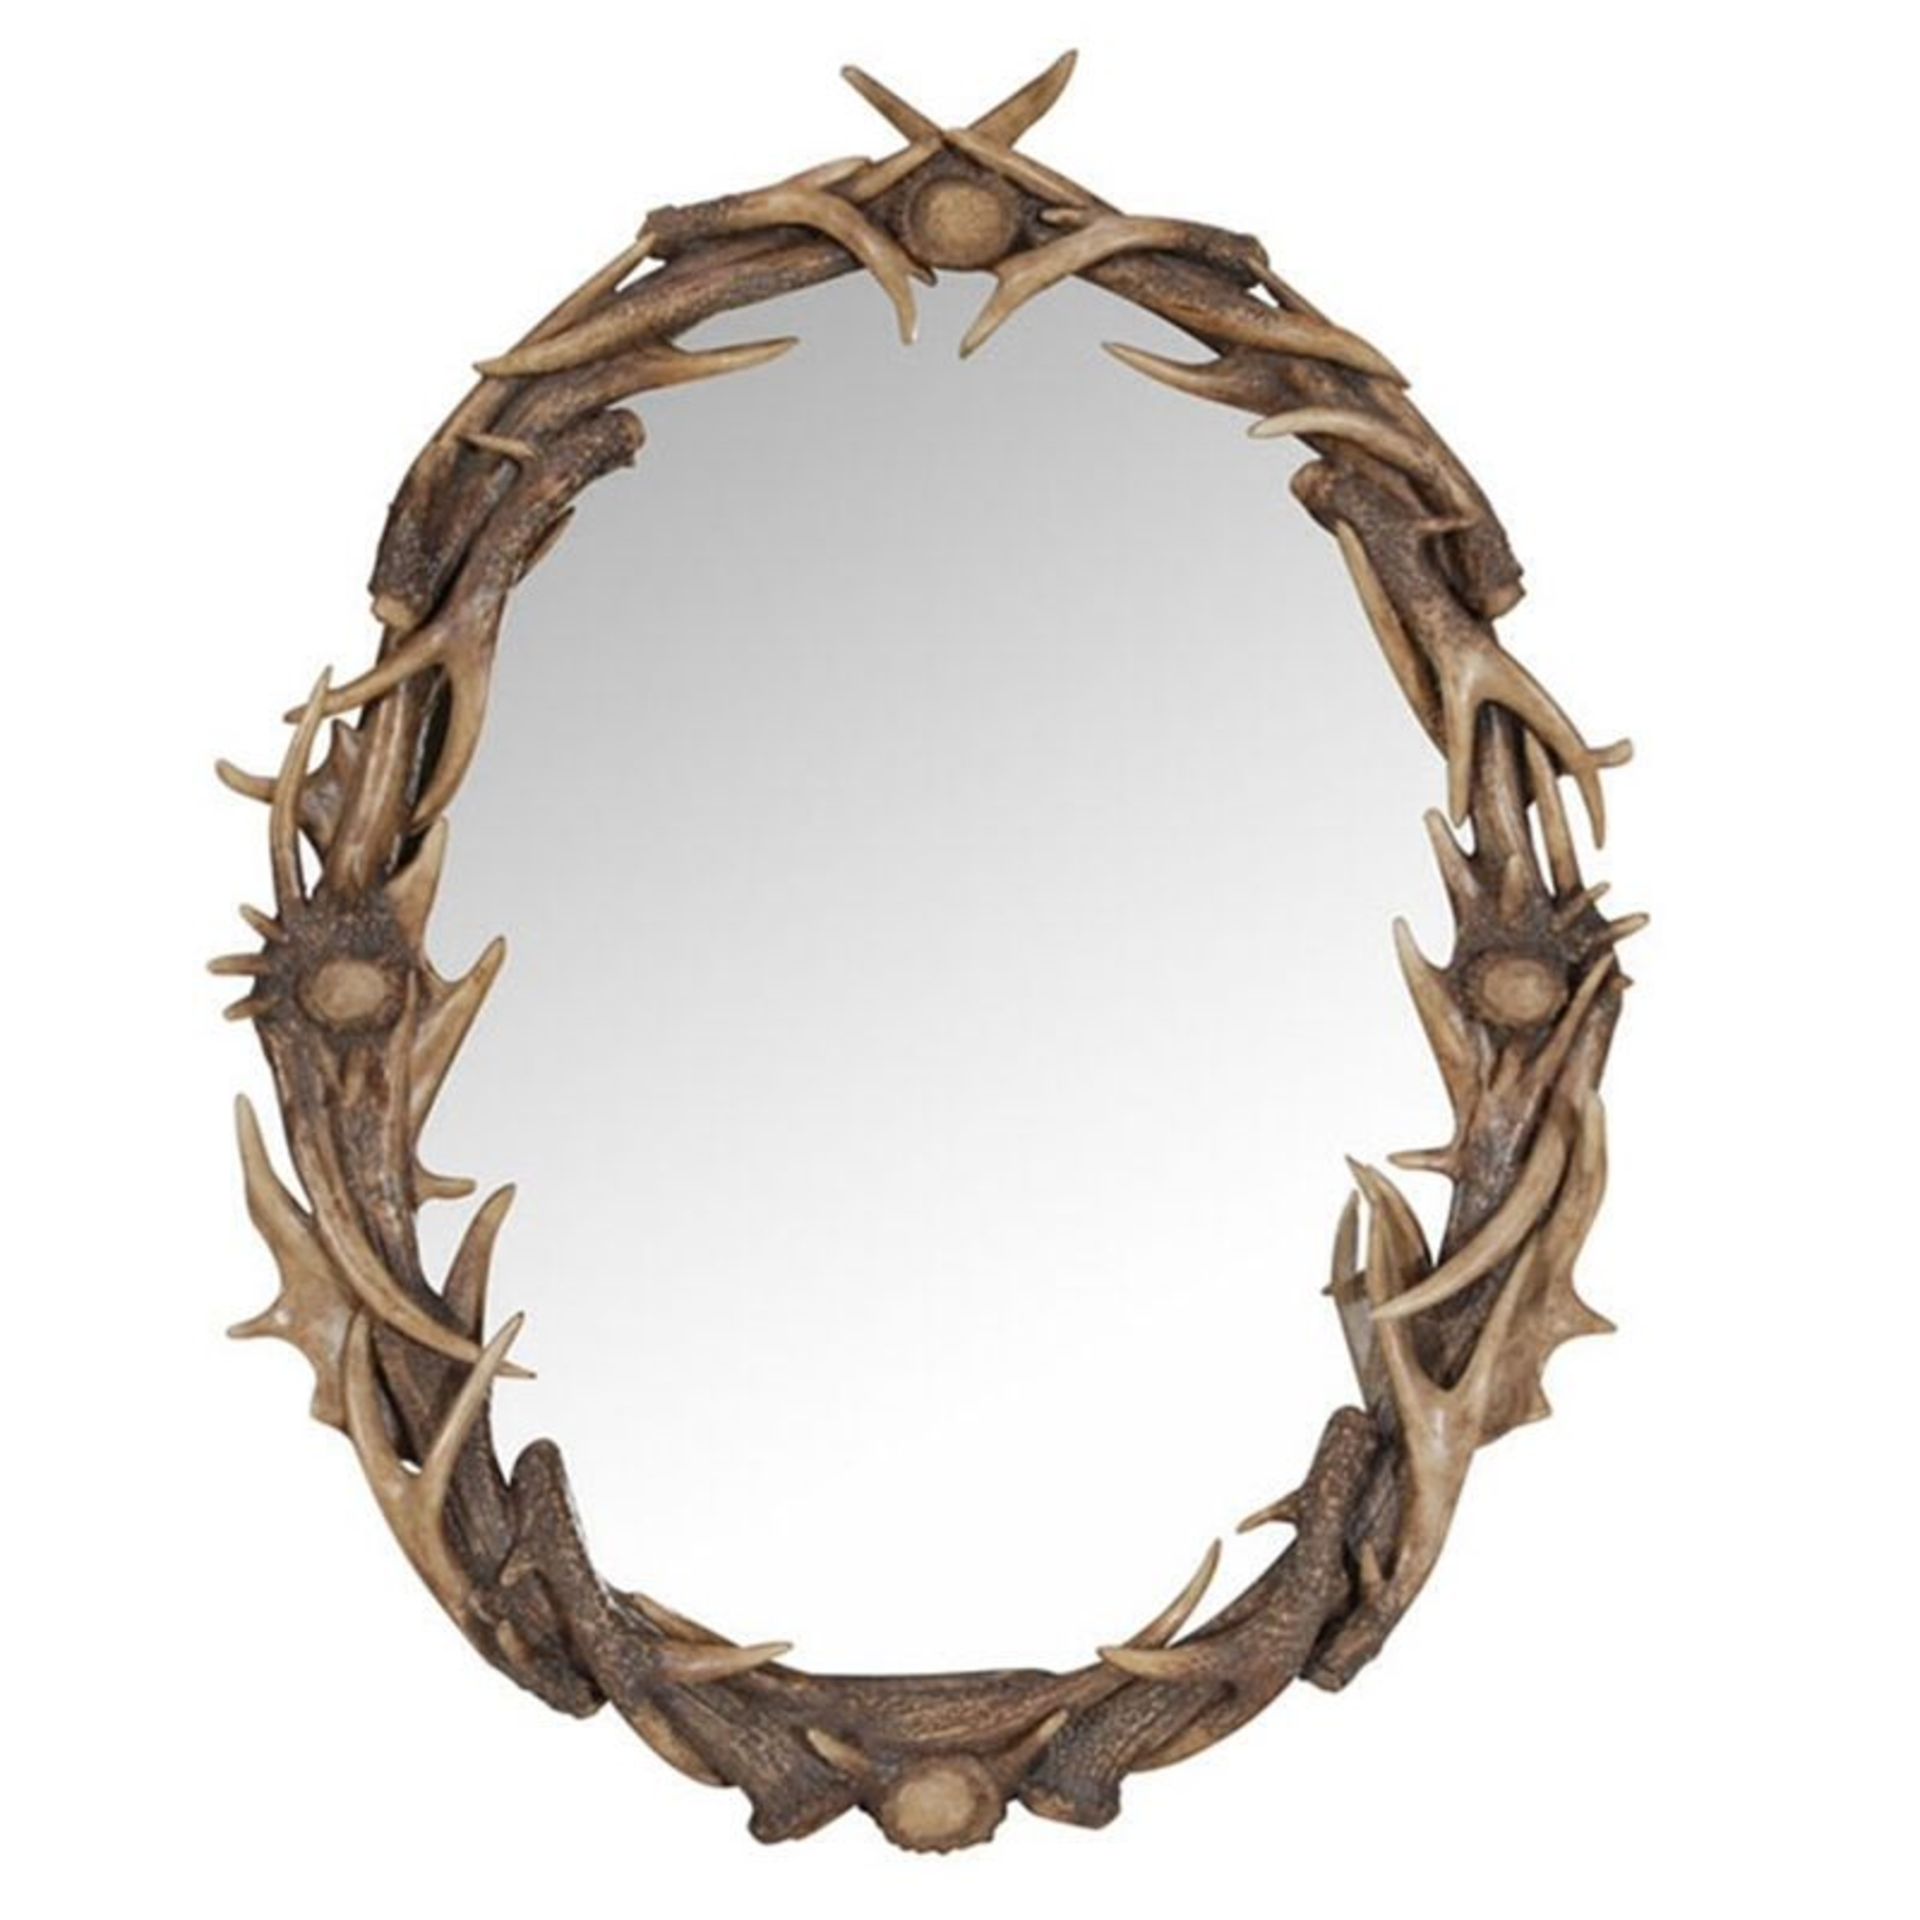 Antler Mirror Naturally Shed Antlers Have Been A Key Feature Of Hunting Lodges Since The Late 19th - Image 2 of 2